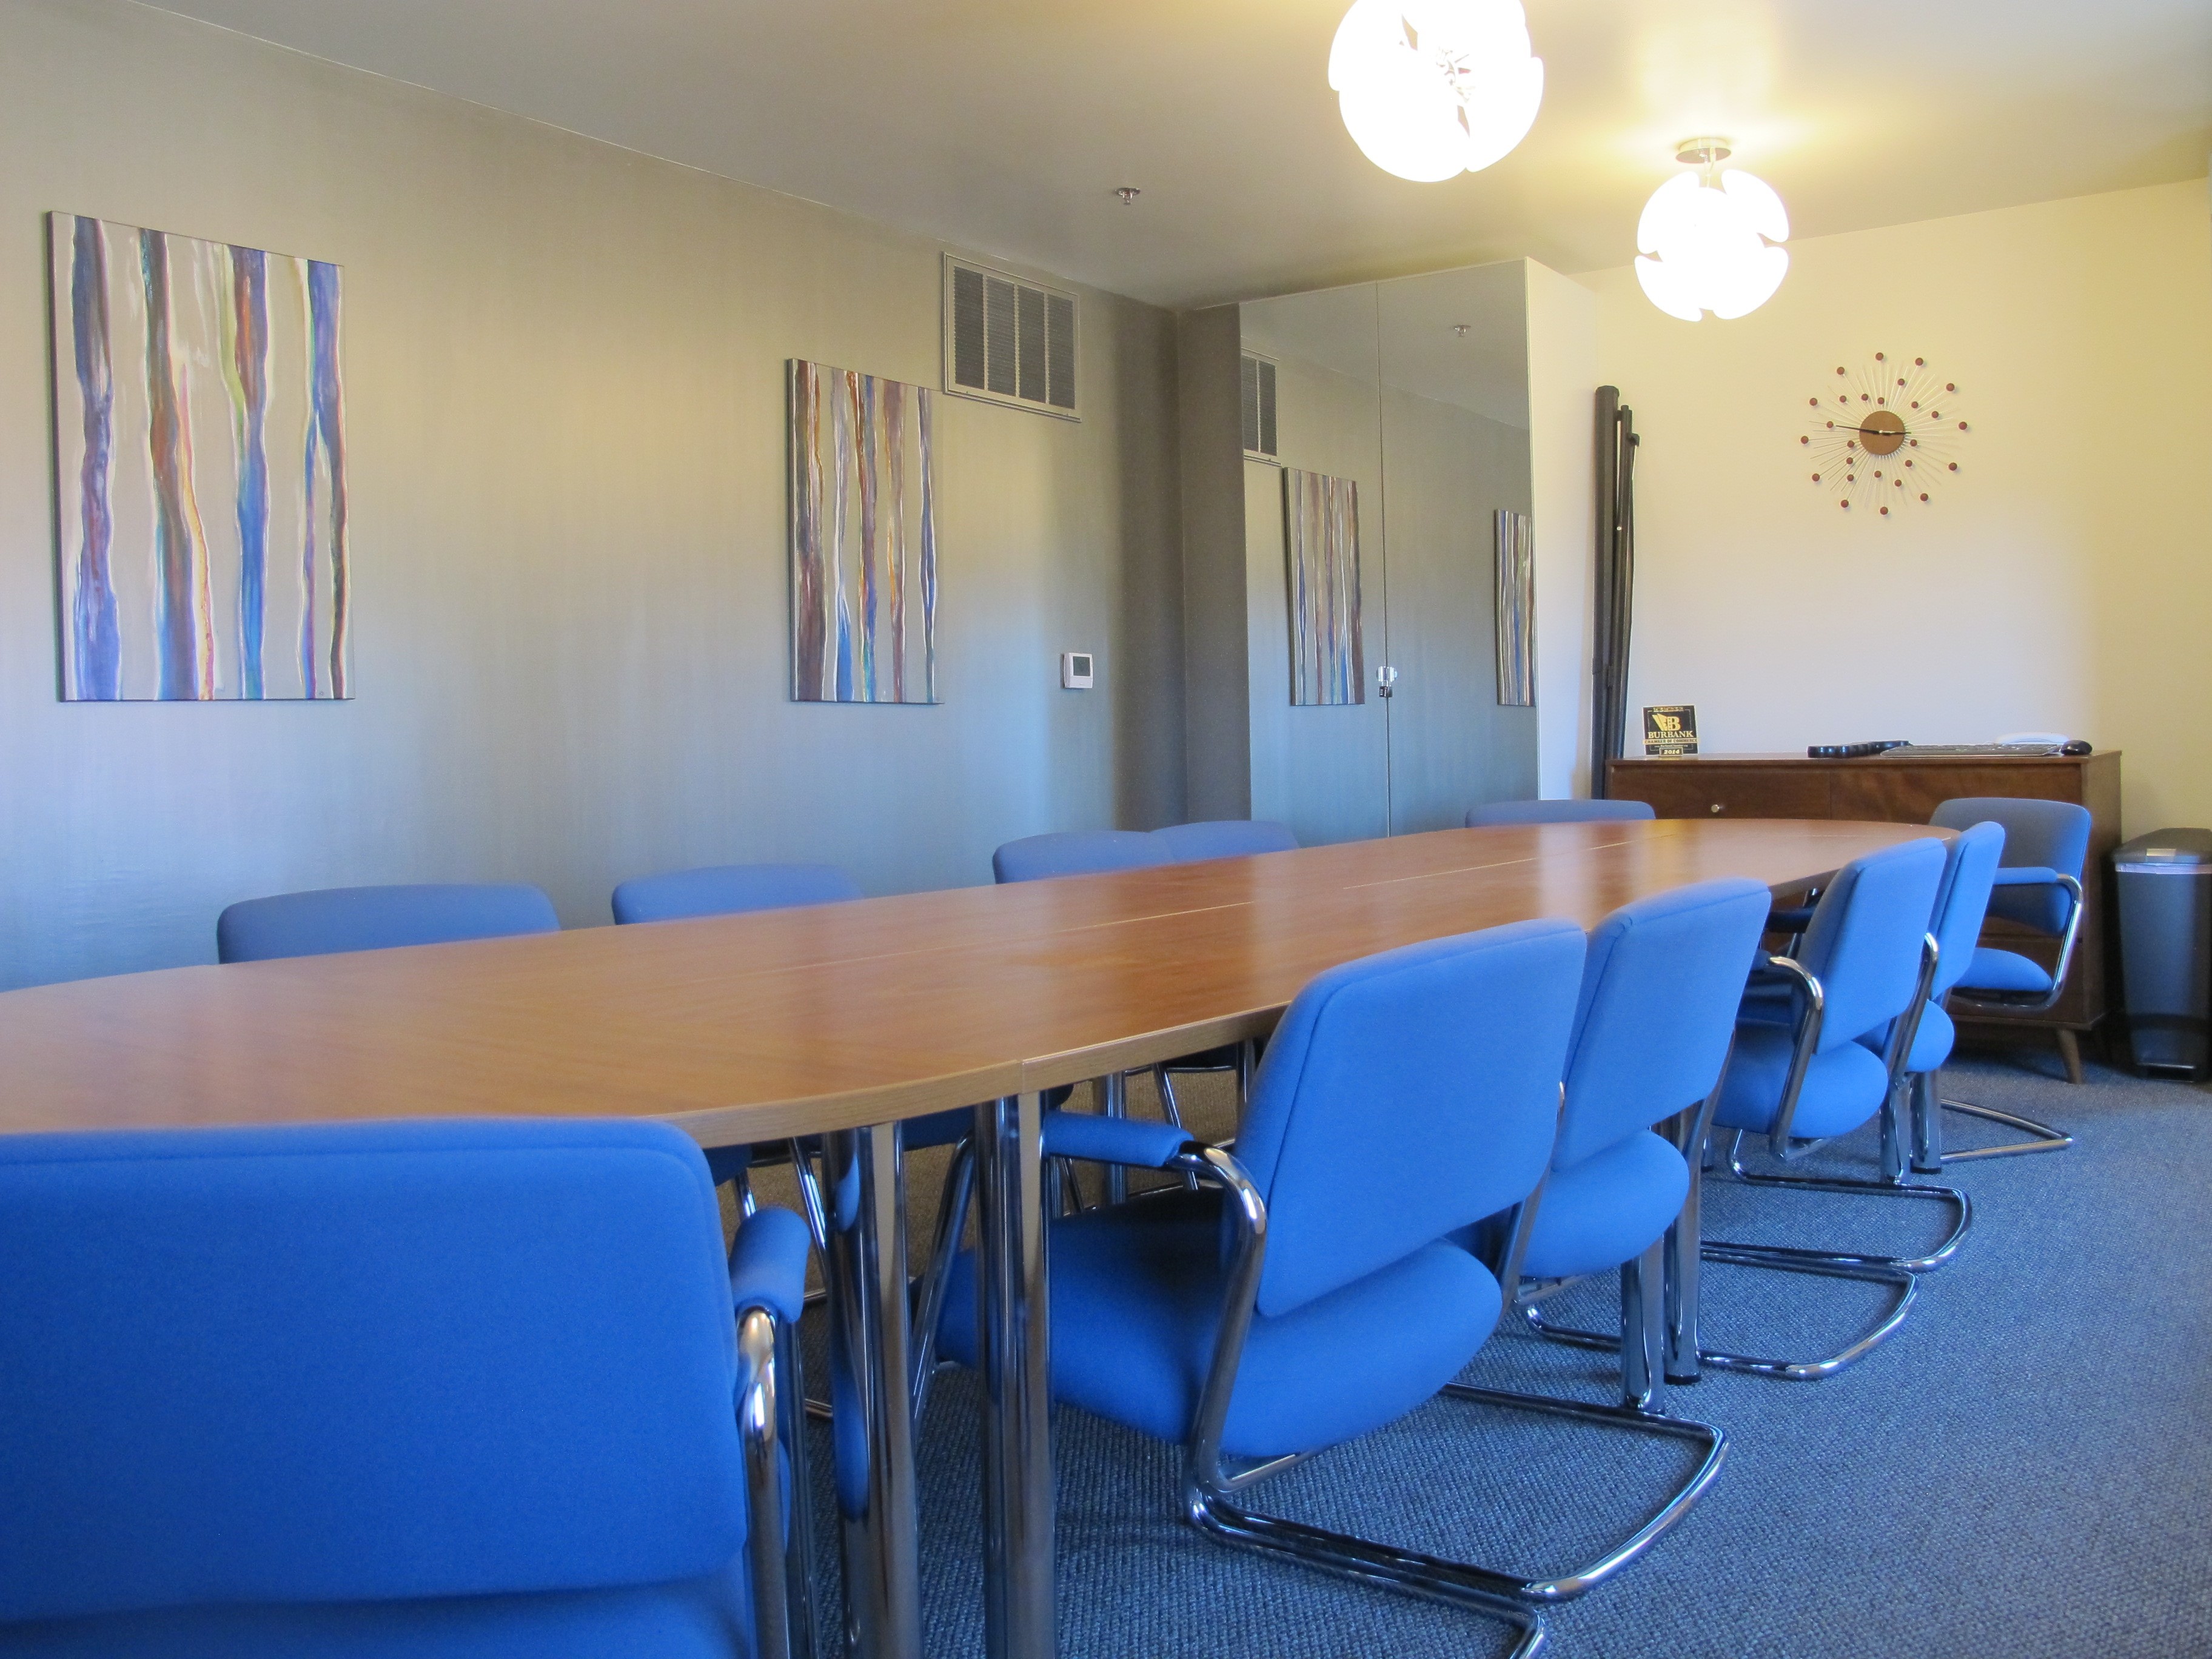 "The Meeting Room On Olive"  - My Other Office The Ideal conference room, training, events, etc.. Customized to meet your business needs! To reserve this space contact us directly. 